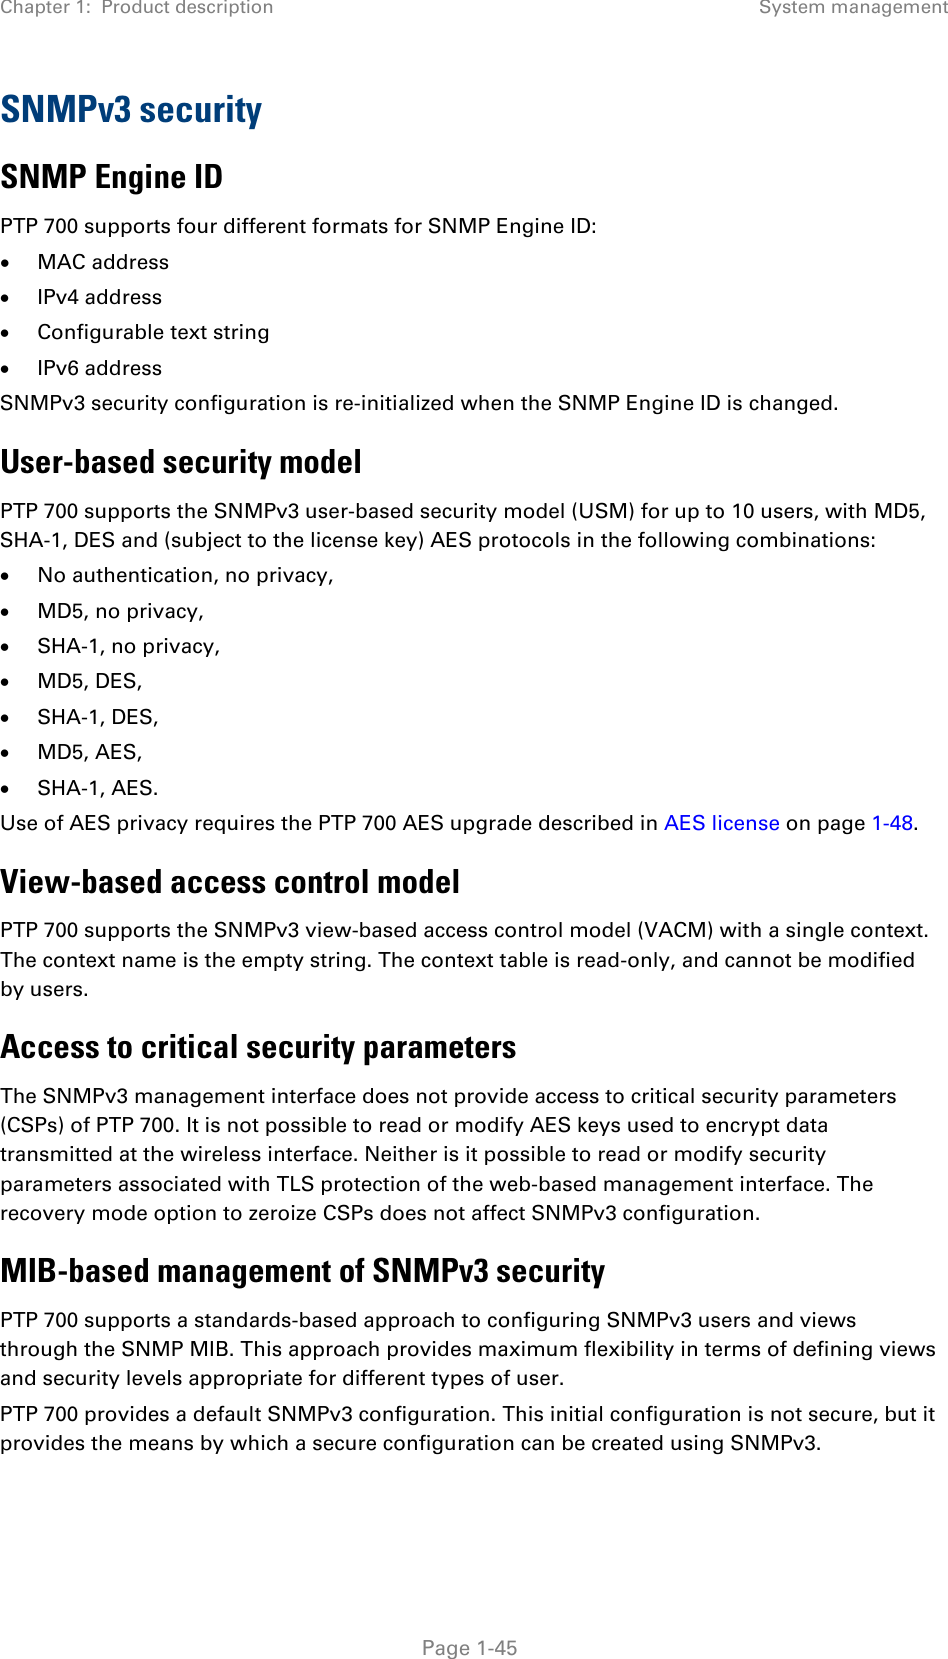 Chapter 1:  Product description System management  SNMPv3 security SNMP Engine ID PTP 700 supports four different formats for SNMP Engine ID: • MAC address • IPv4 address • Configurable text string • IPv6 address SNMPv3 security configuration is re-initialized when the SNMP Engine ID is changed. User-based security model PTP 700 supports the SNMPv3 user-based security model (USM) for up to 10 users, with MD5, SHA-1, DES and (subject to the license key) AES protocols in the following combinations: • No authentication, no privacy, • MD5, no privacy, • SHA-1, no privacy, • MD5, DES, • SHA-1, DES, • MD5, AES, • SHA-1, AES. Use of AES privacy requires the PTP 700 AES upgrade described in AES license on page 1-48. View-based access control model PTP 700 supports the SNMPv3 view-based access control model (VACM) with a single context. The context name is the empty string. The context table is read-only, and cannot be modified by users.  Access to critical security parameters The SNMPv3 management interface does not provide access to critical security parameters (CSPs) of PTP 700. It is not possible to read or modify AES keys used to encrypt data transmitted at the wireless interface. Neither is it possible to read or modify security parameters associated with TLS protection of the web-based management interface. The recovery mode option to zeroize CSPs does not affect SNMPv3 configuration. MIB-based management of SNMPv3 security PTP 700 supports a standards-based approach to configuring SNMPv3 users and views through the SNMP MIB. This approach provides maximum flexibility in terms of defining views and security levels appropriate for different types of user. PTP 700 provides a default SNMPv3 configuration. This initial configuration is not secure, but it provides the means by which a secure configuration can be created using SNMPv3.  Page 1-45 